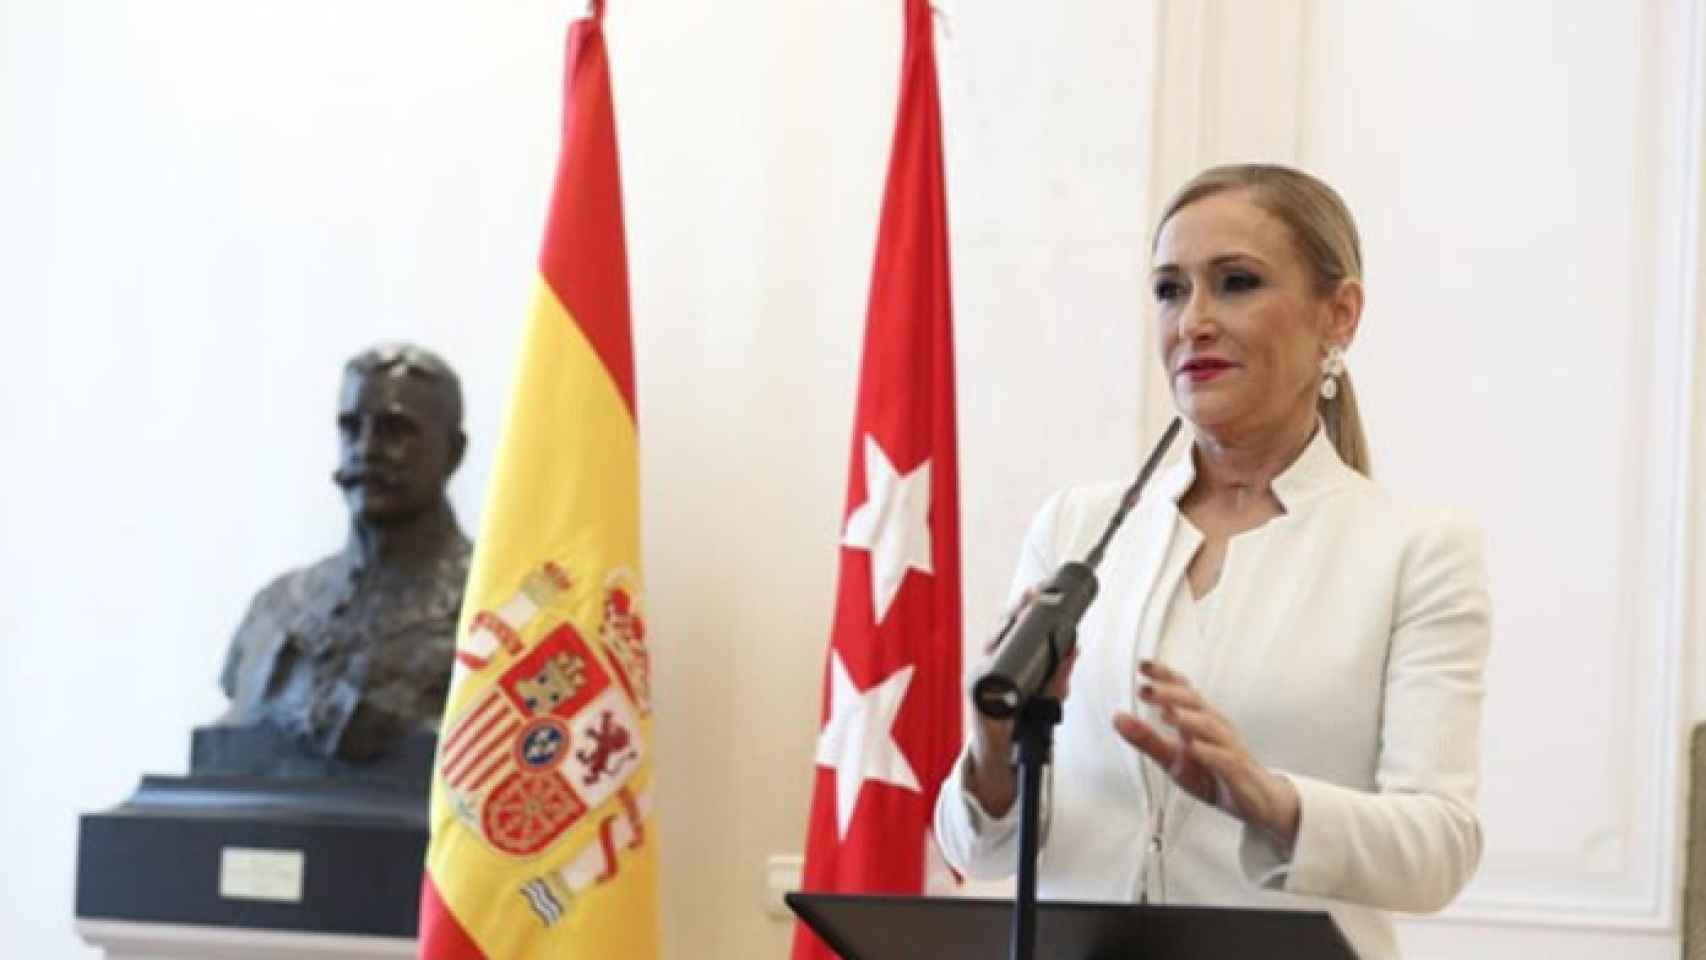 Trending-topic-cifuentes-dimision